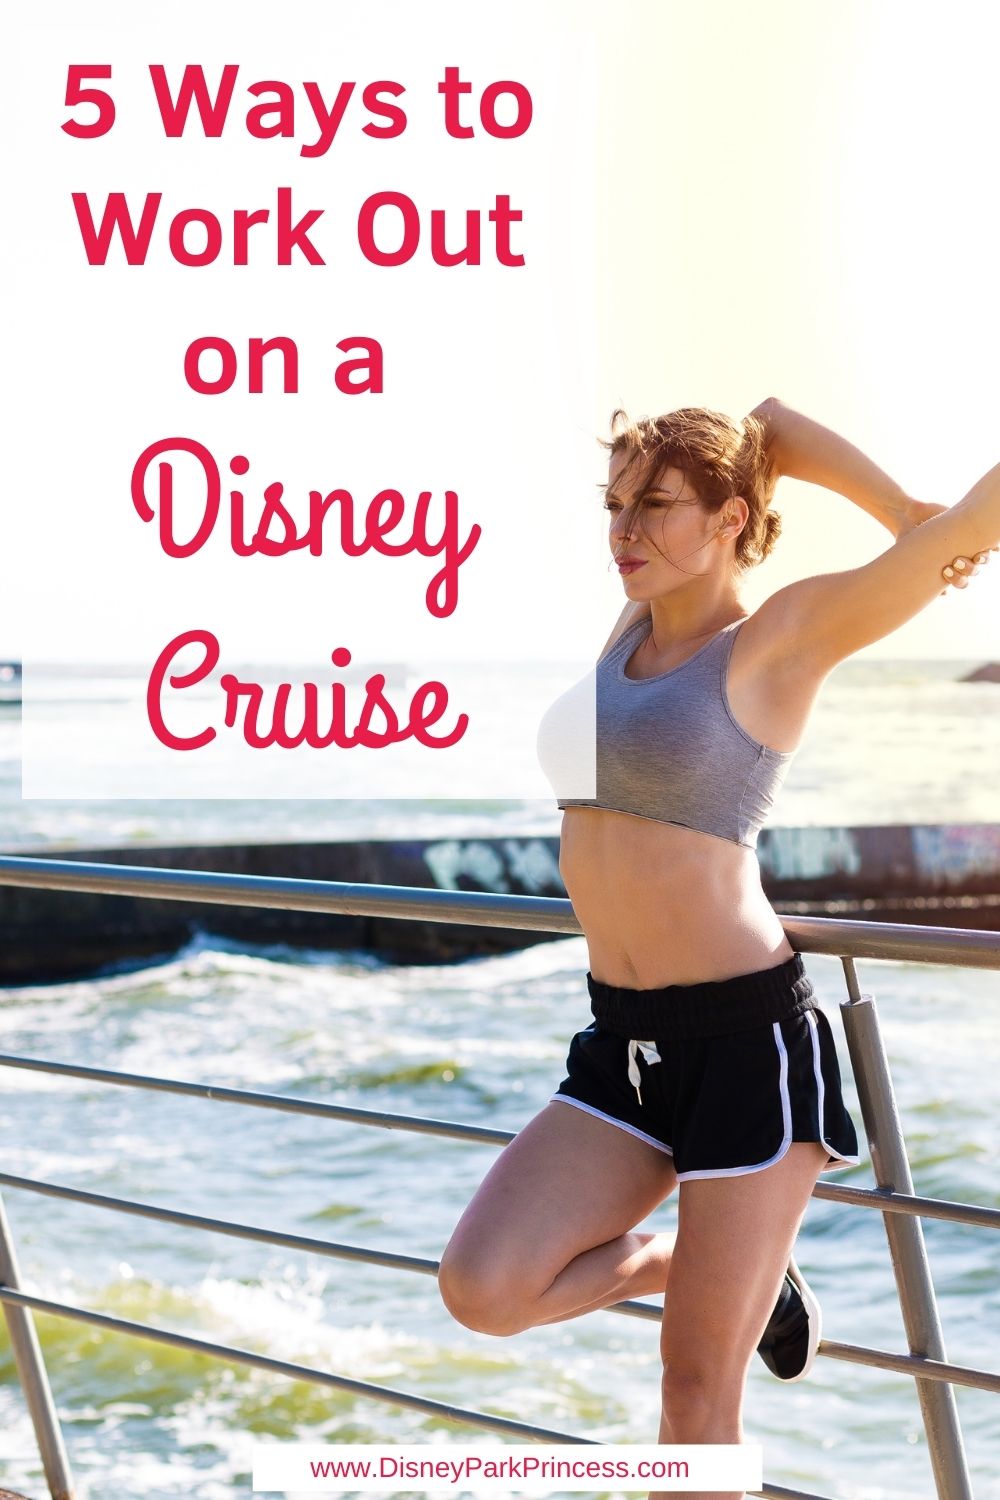 If you're looking for great ways to work out while on a Disney Cruise, here are 5 great ways to do just that! 